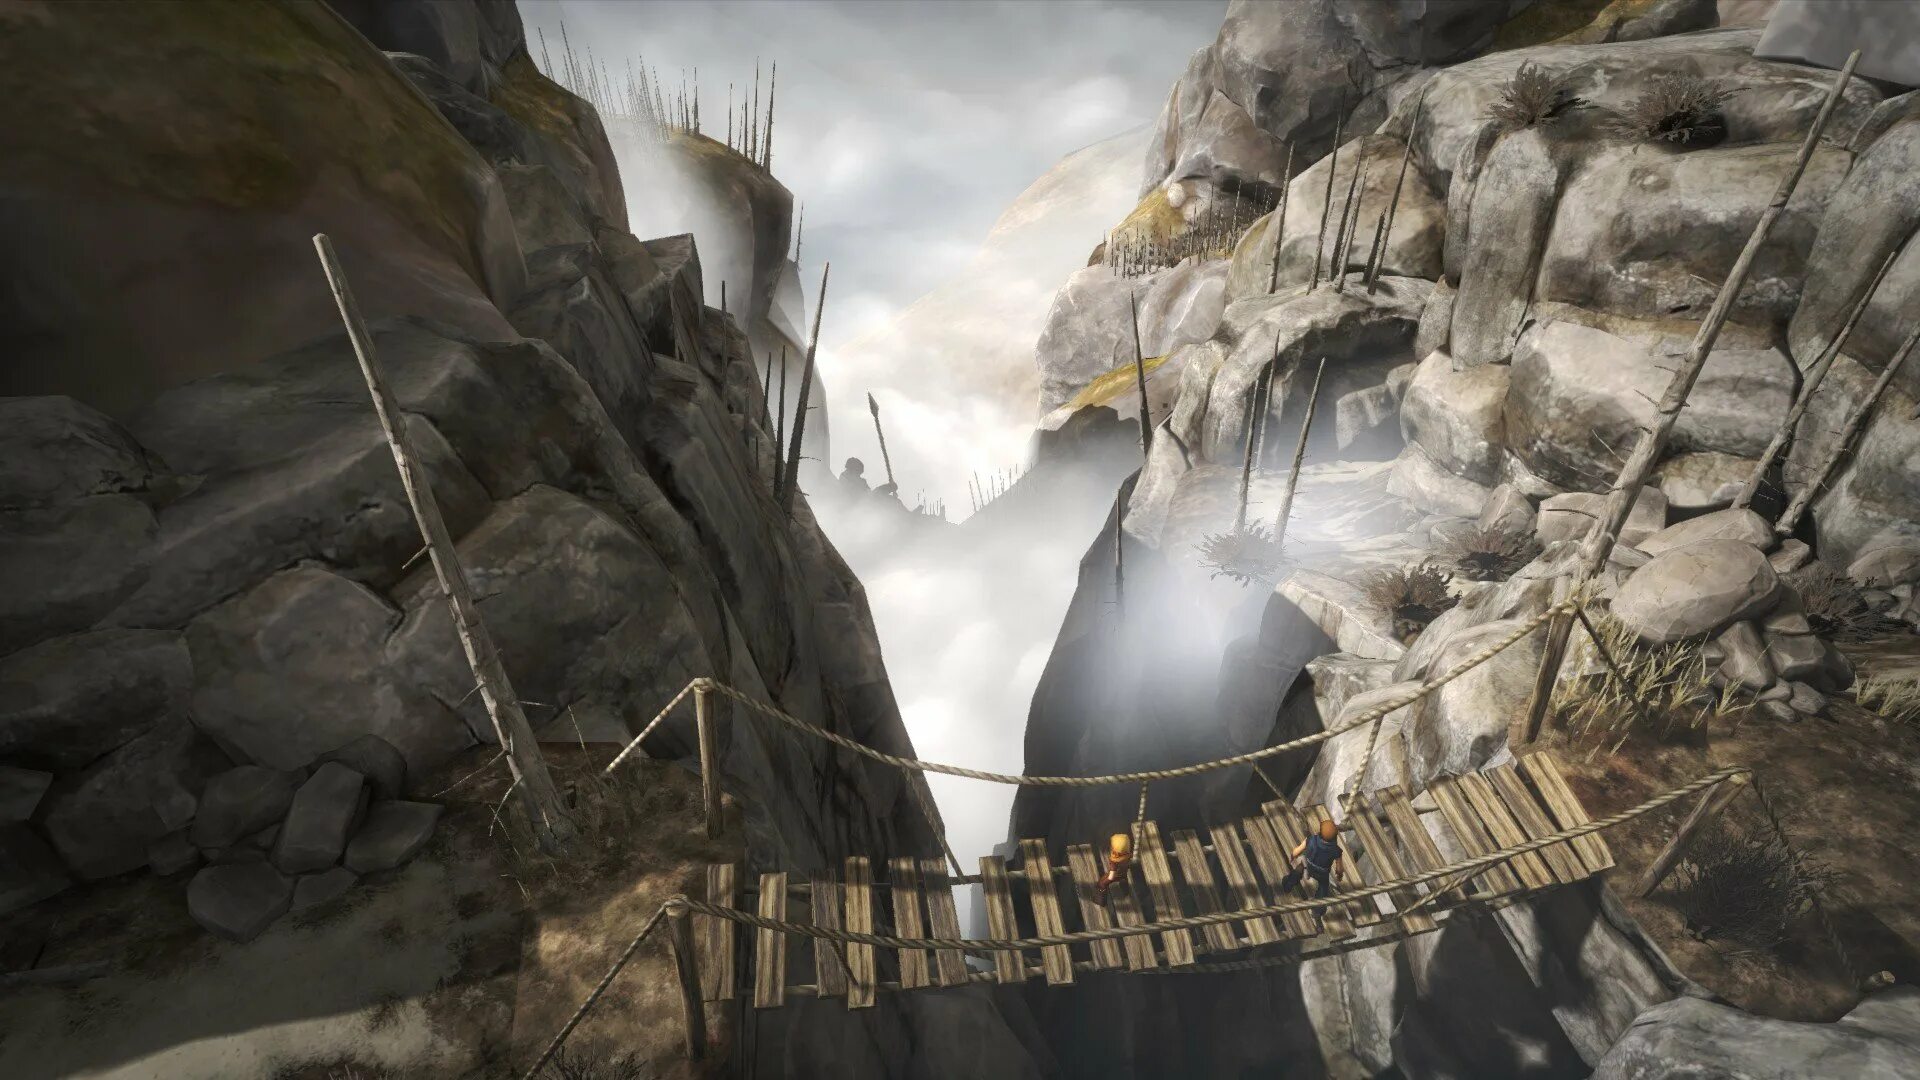 Two brothers remake ps5. Brothers: a Tale of two sons. Brothers: a Tale of two sons (2013). Brothers a Tale of two sons диск. Brothers: a Tale of two sons (2013) игры.